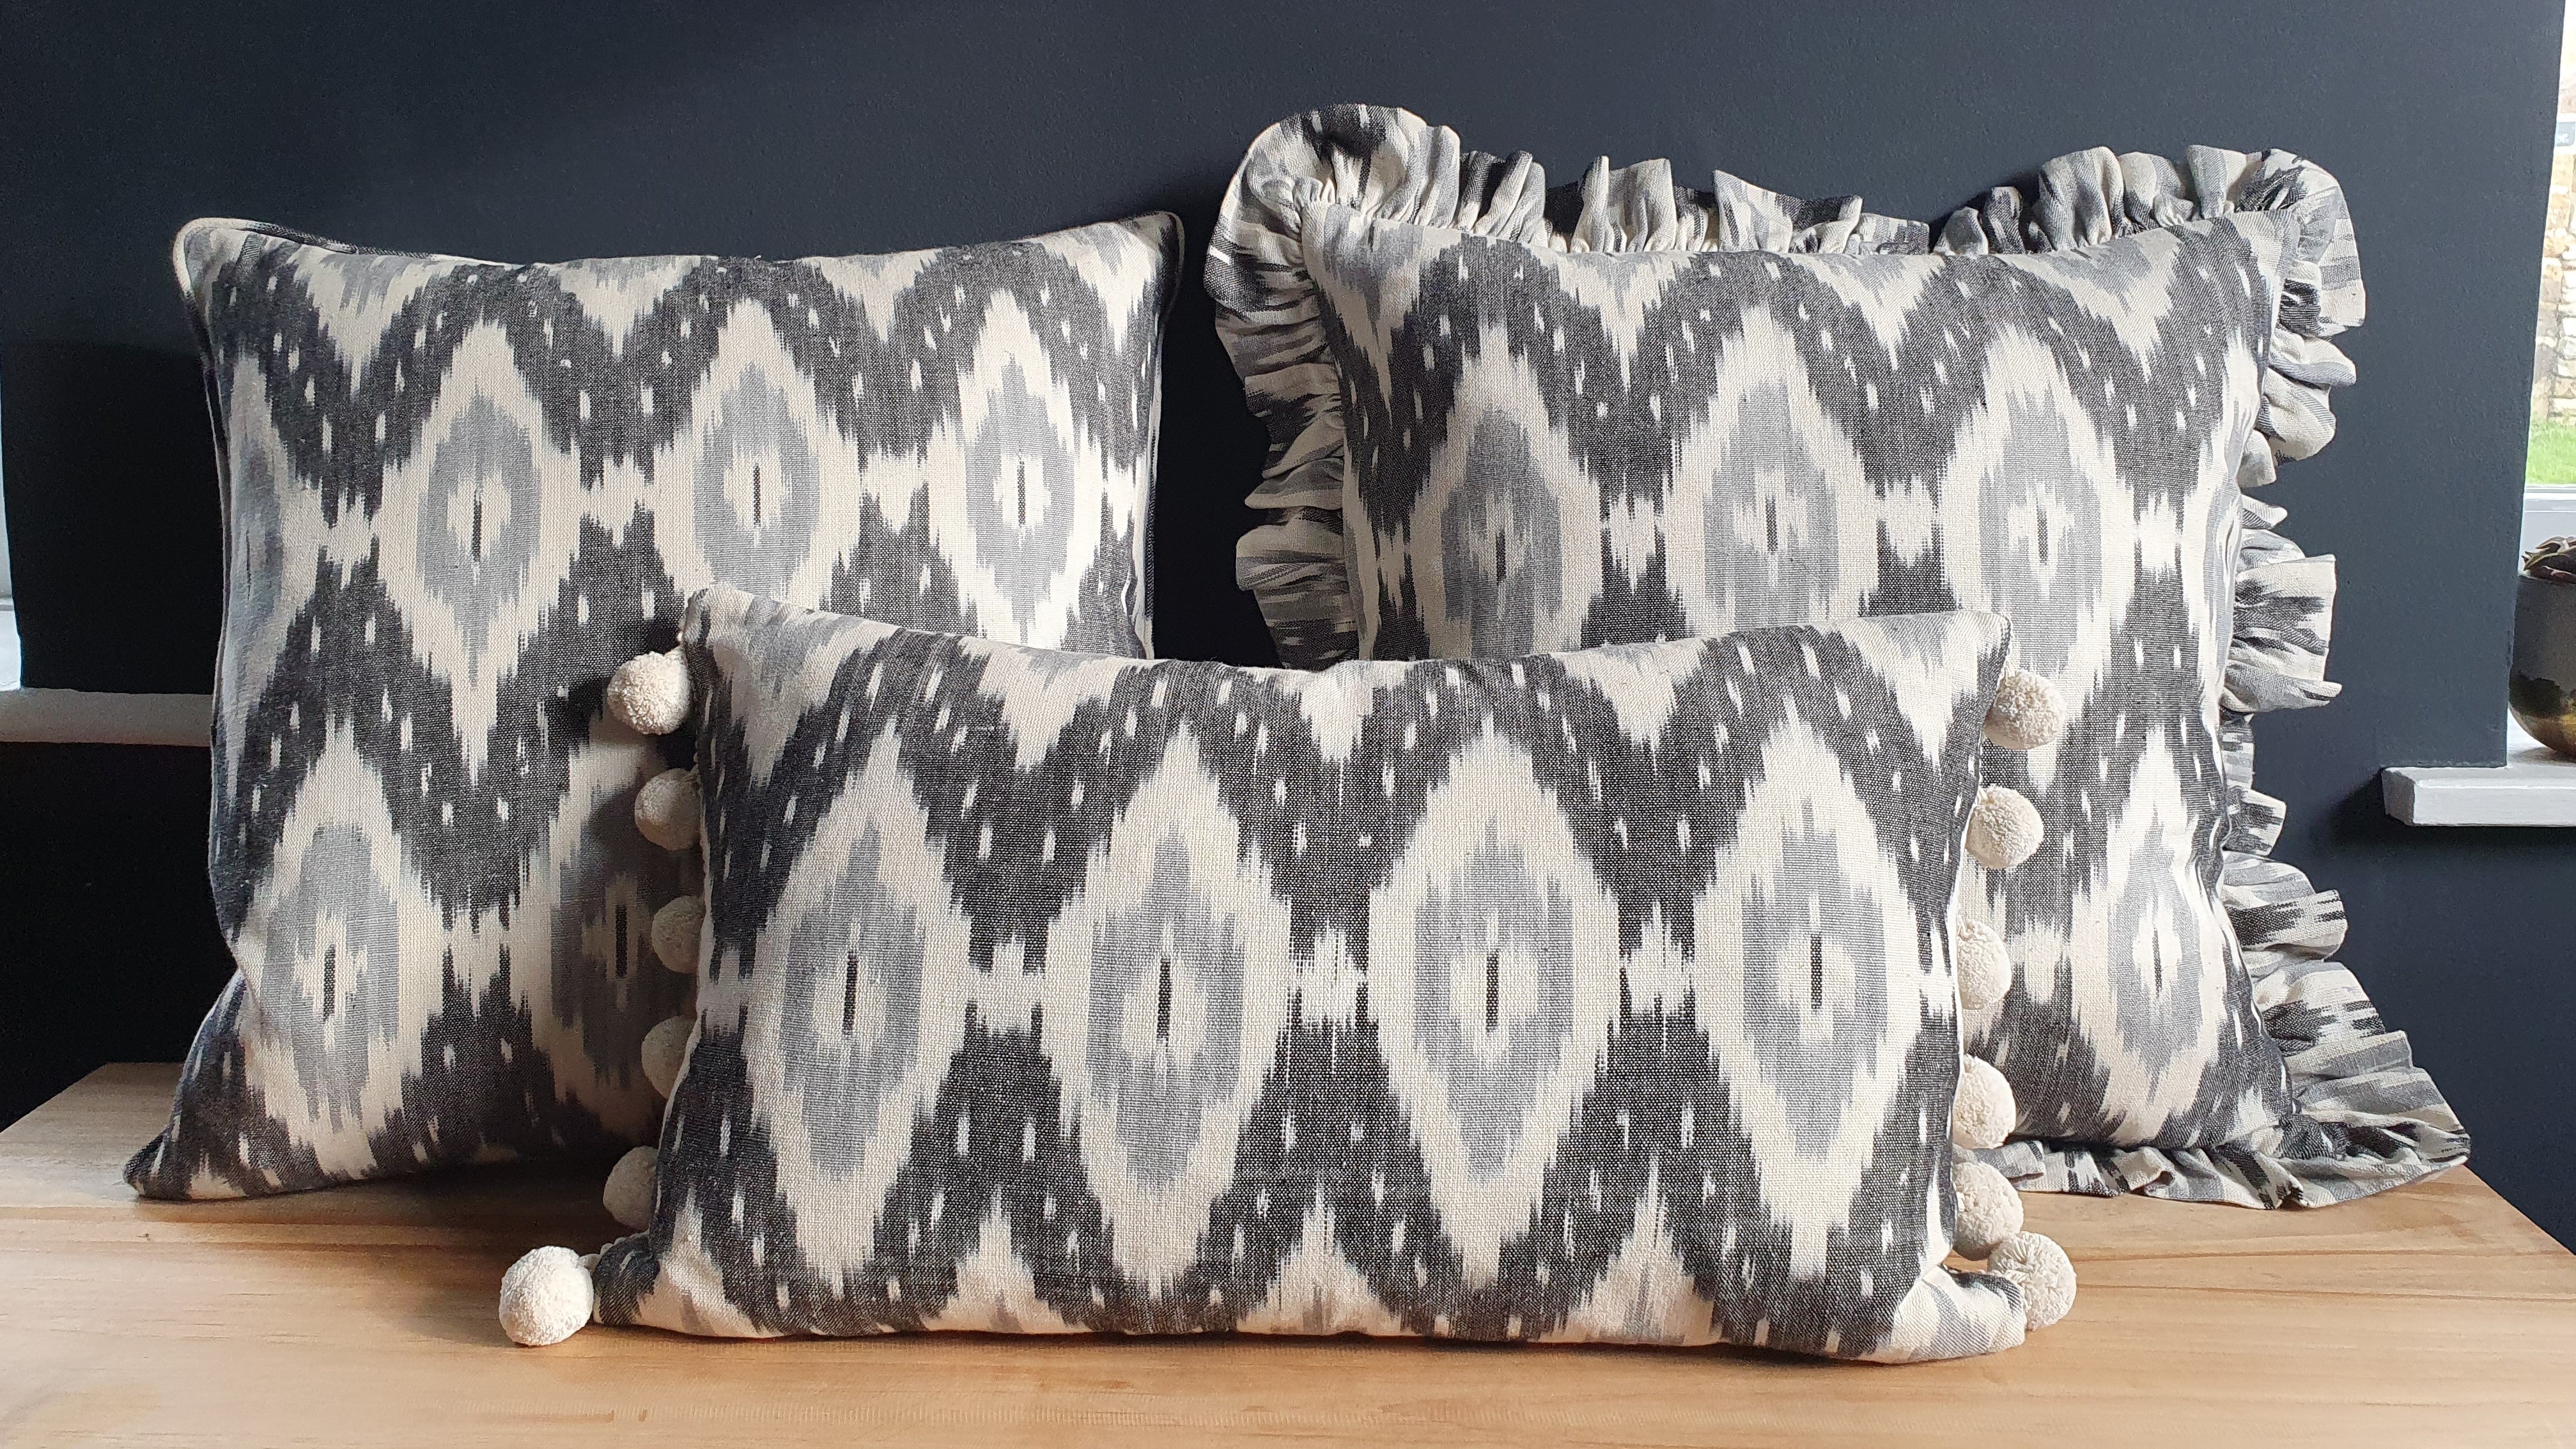 Fyfe Square Ikat Scatter Cushion with Piping.